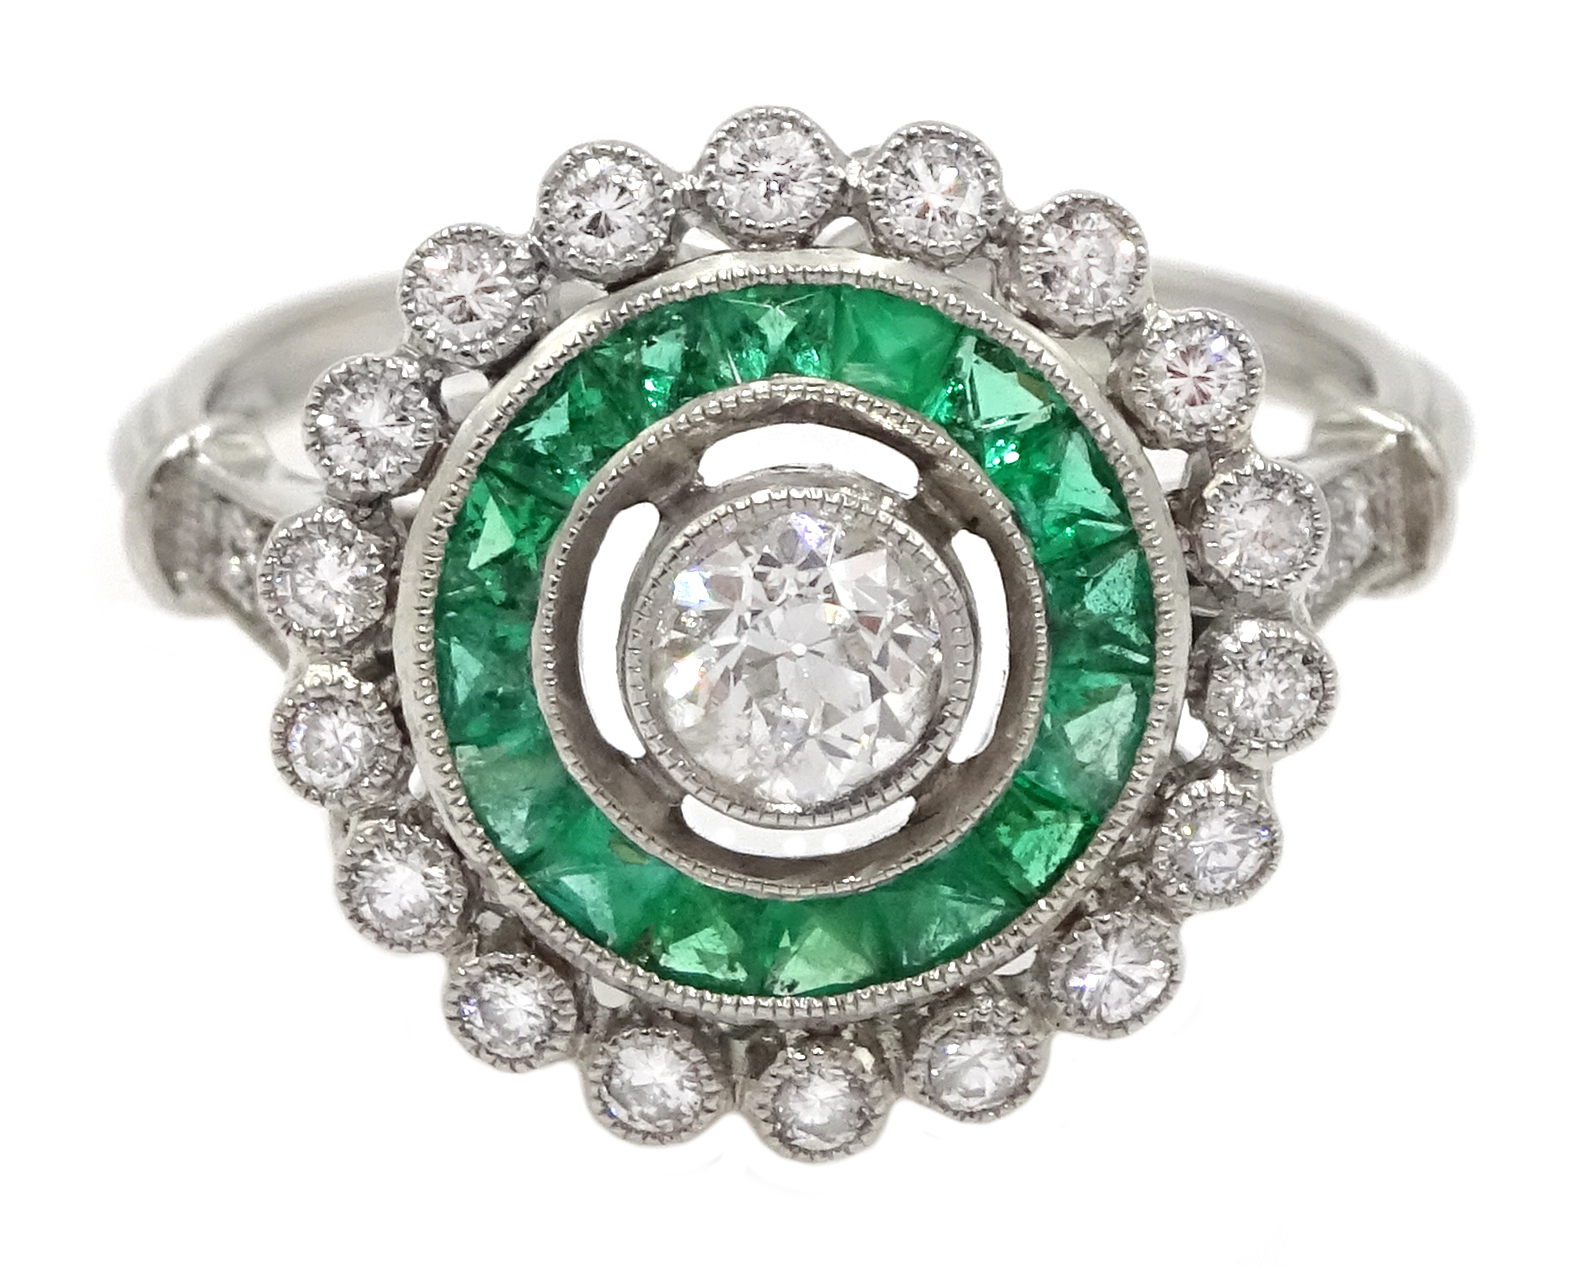 Edwardian style platinum, emerald and diamond cluster ring, central old cut diamond surrounded by c